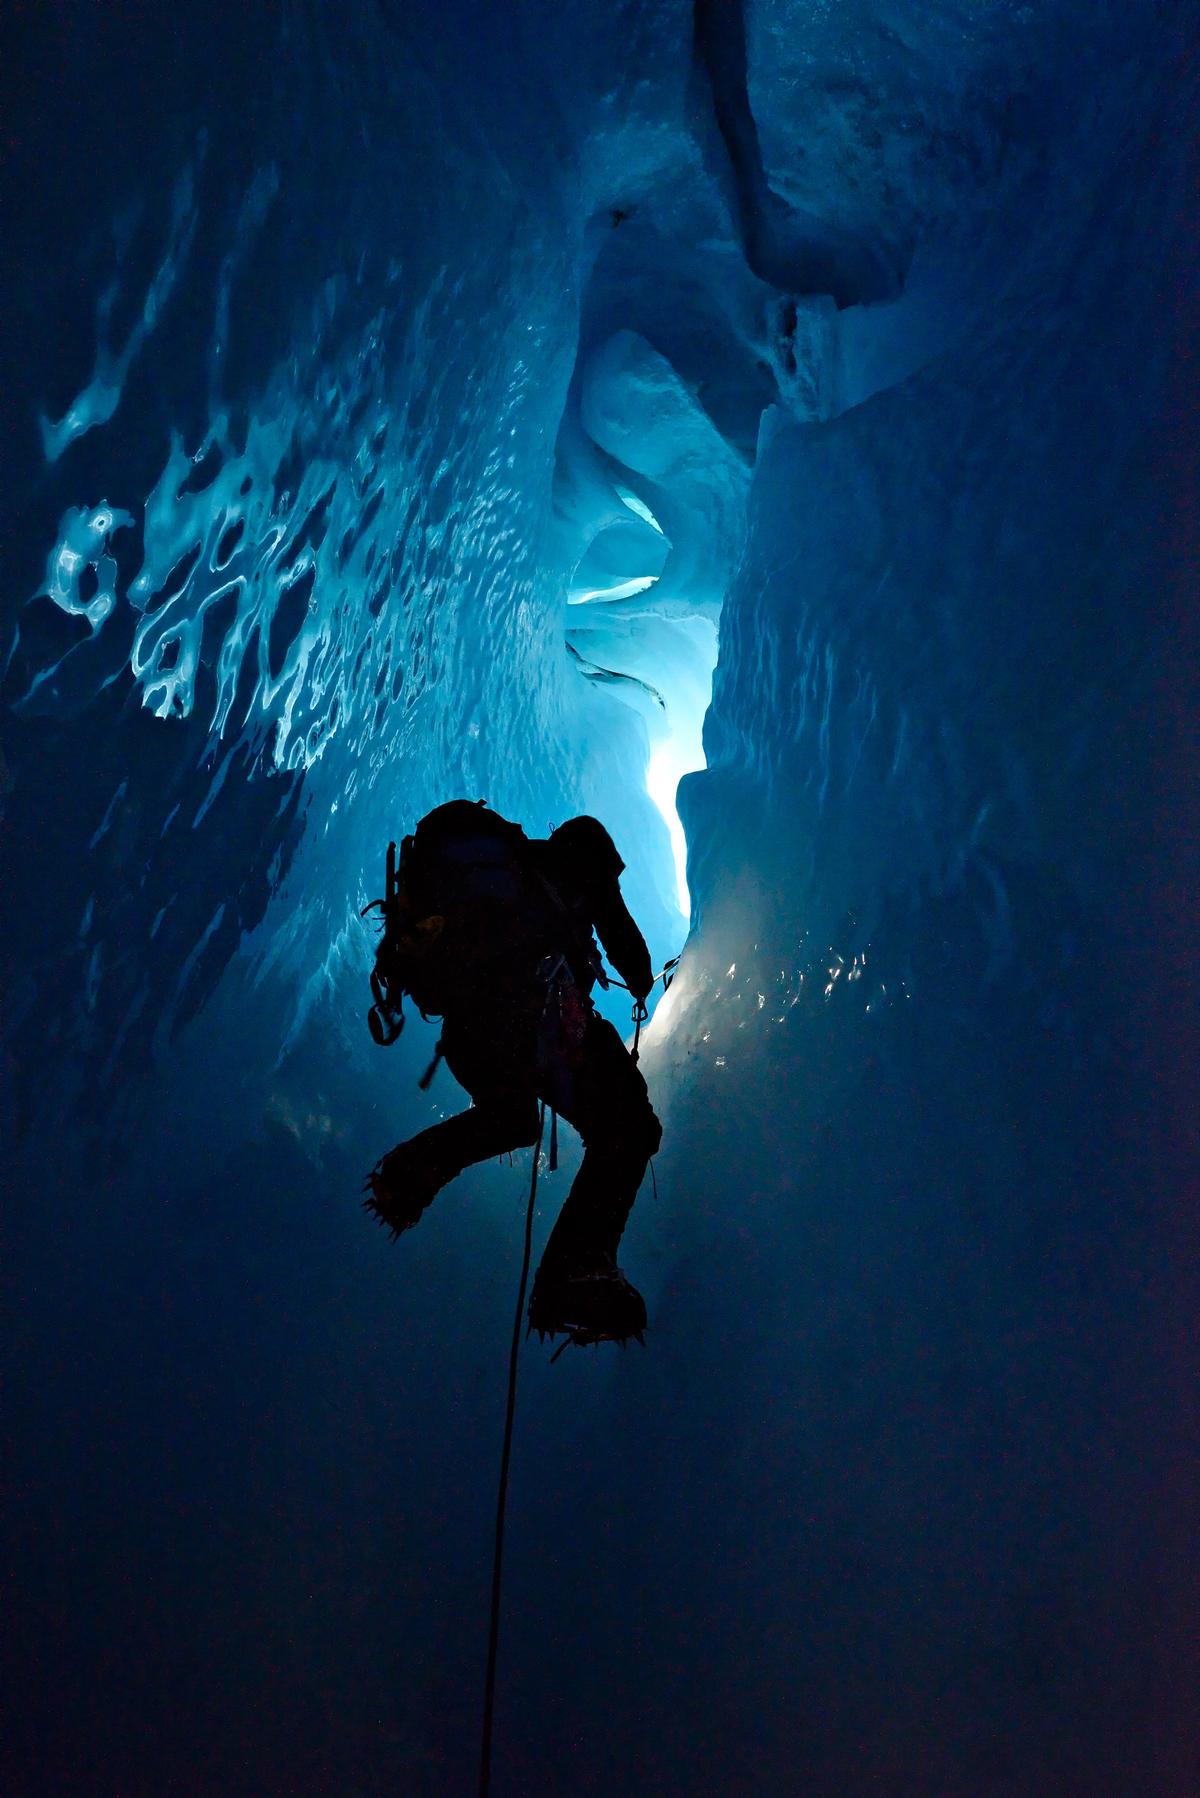 Ascending up the ice cave wall. (Courtesy of Caters News)